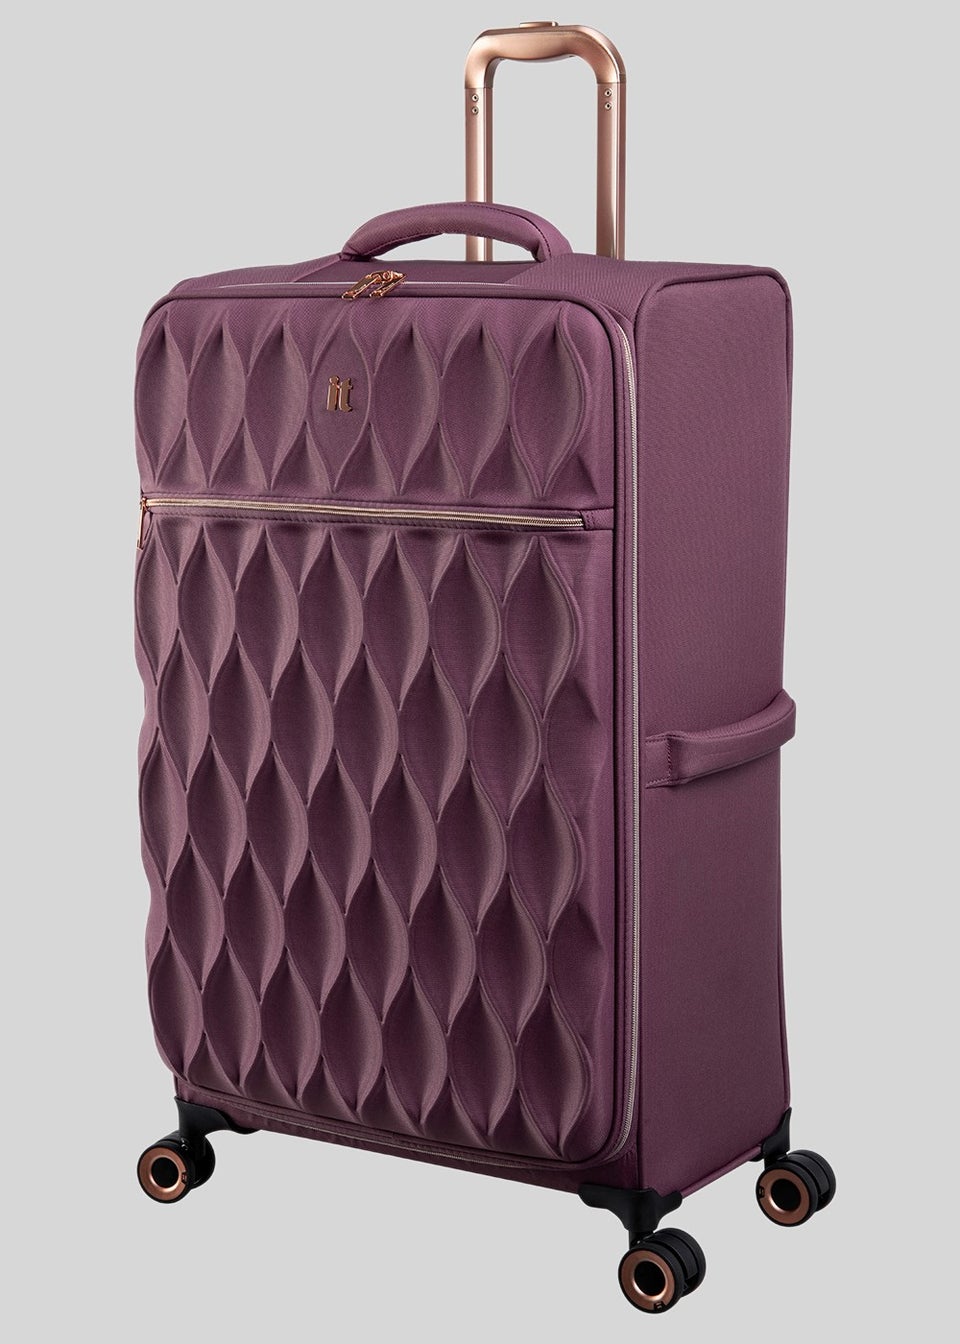 IT Luggage Enliven Burgundy Suitcase